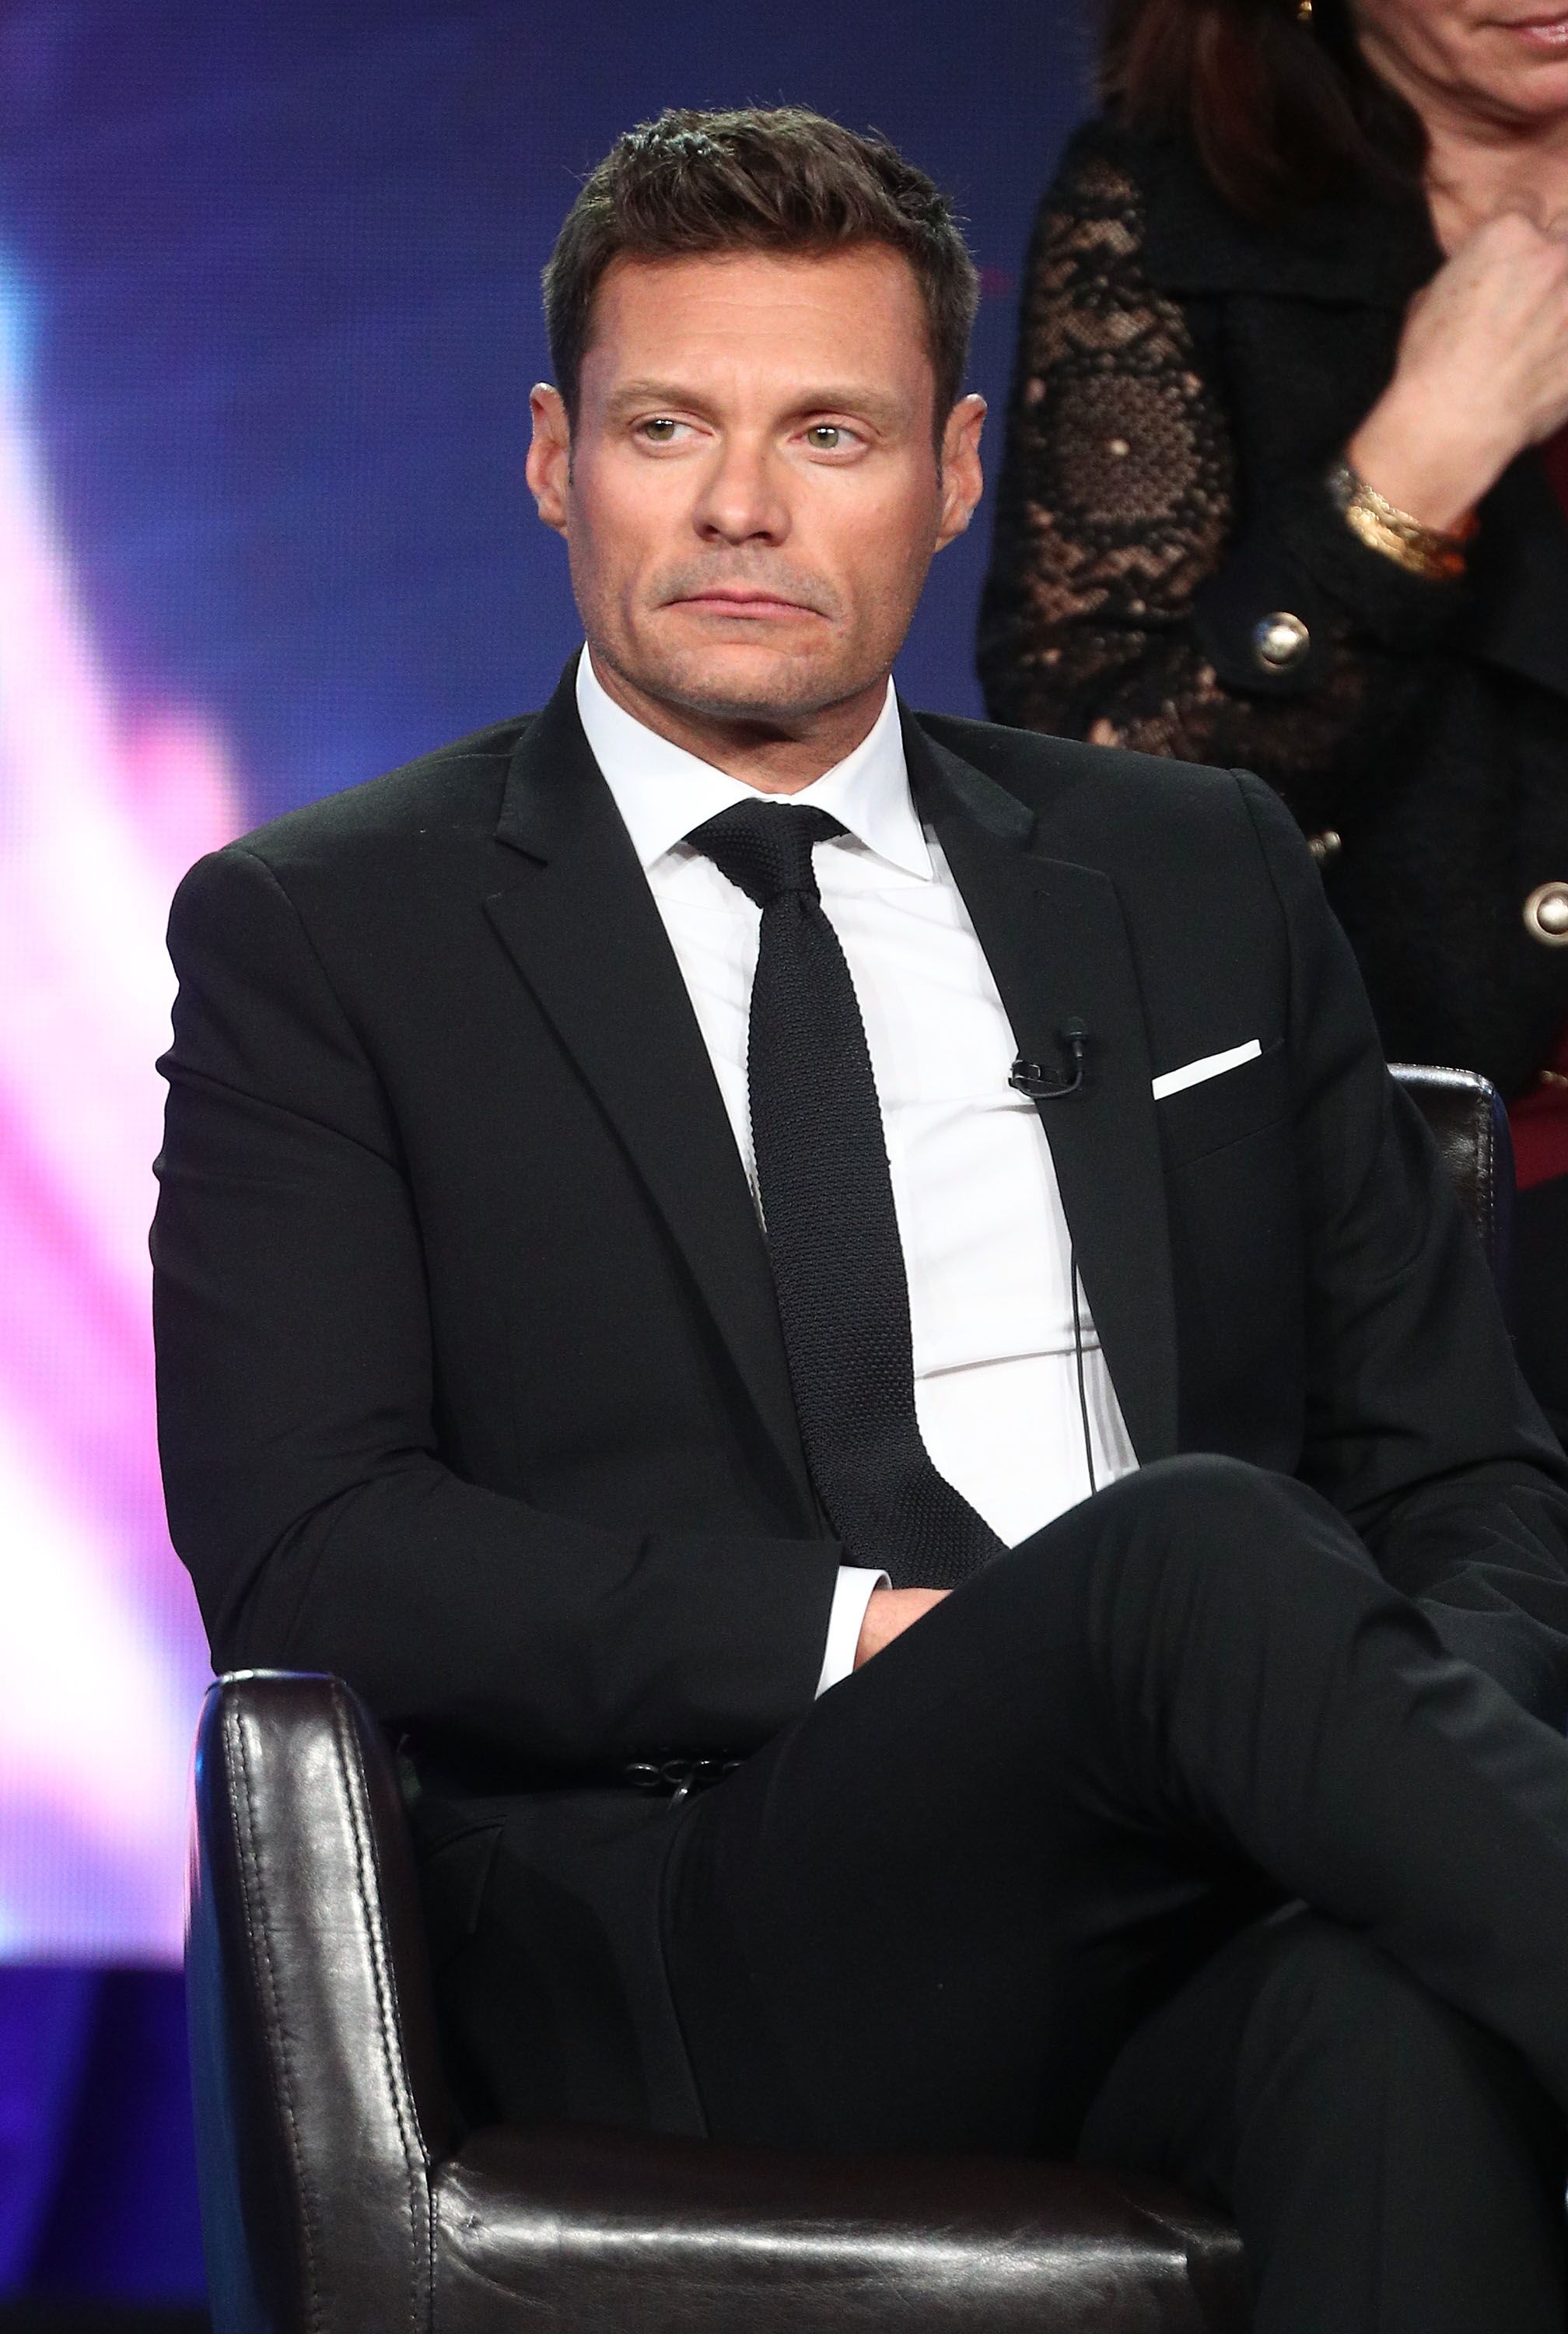 Ryan Seacrest during the ABC Television/Disney portion of the 2018 Winter Television Critics Association Press Tour | Photo: Getty Images